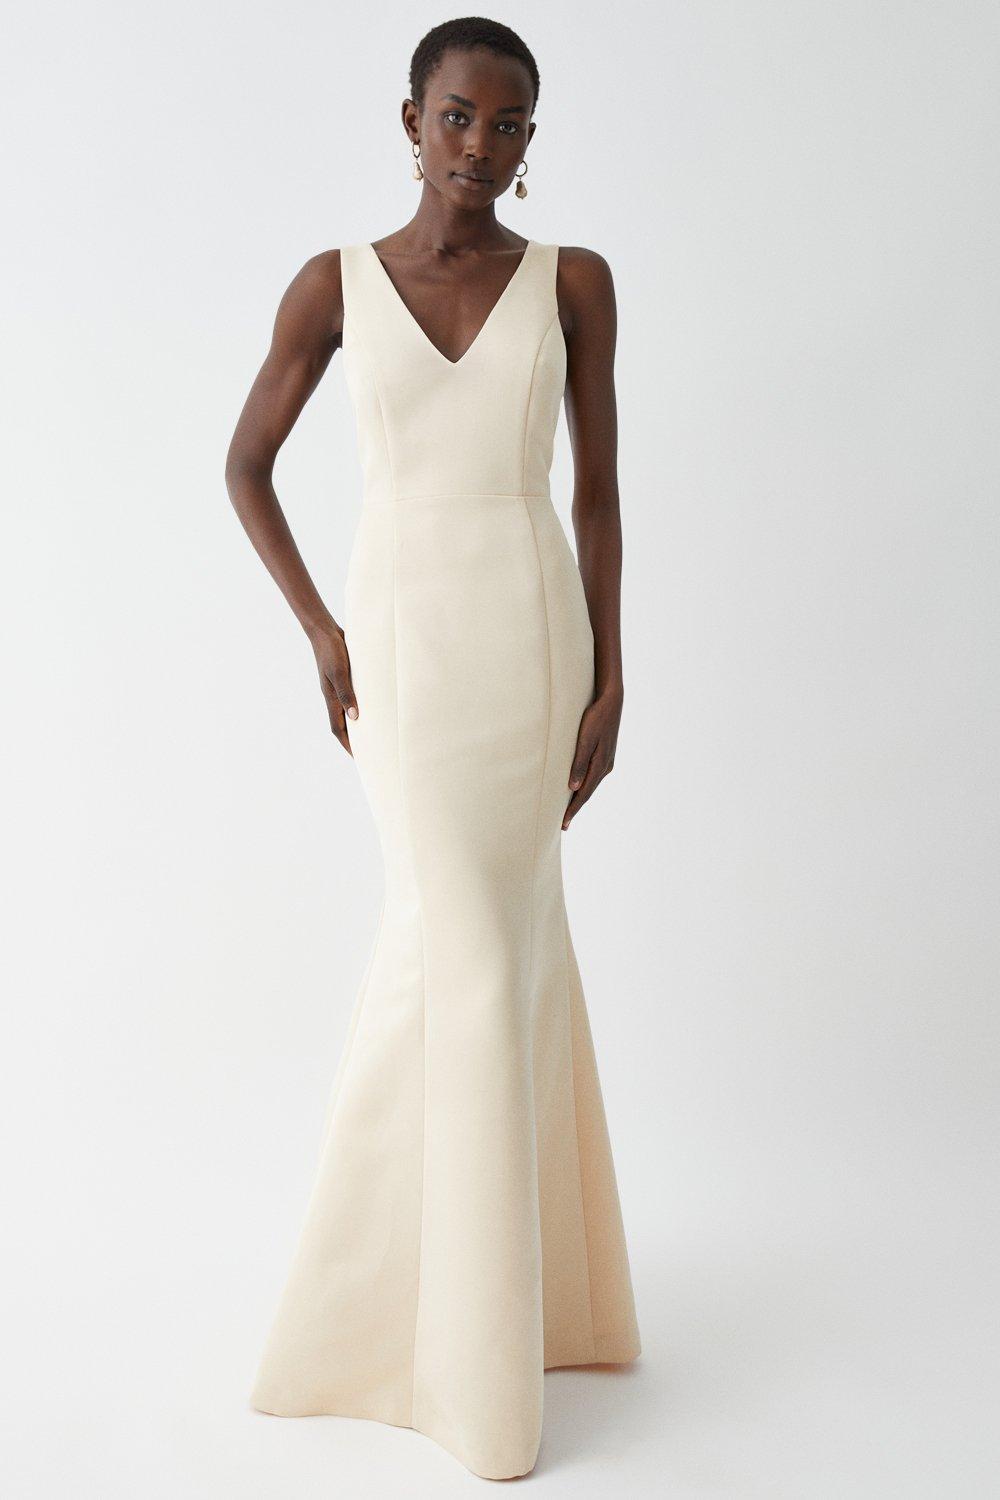 Structured Satin Cross Back Fishtail Bridesmaids Dress - Champagne